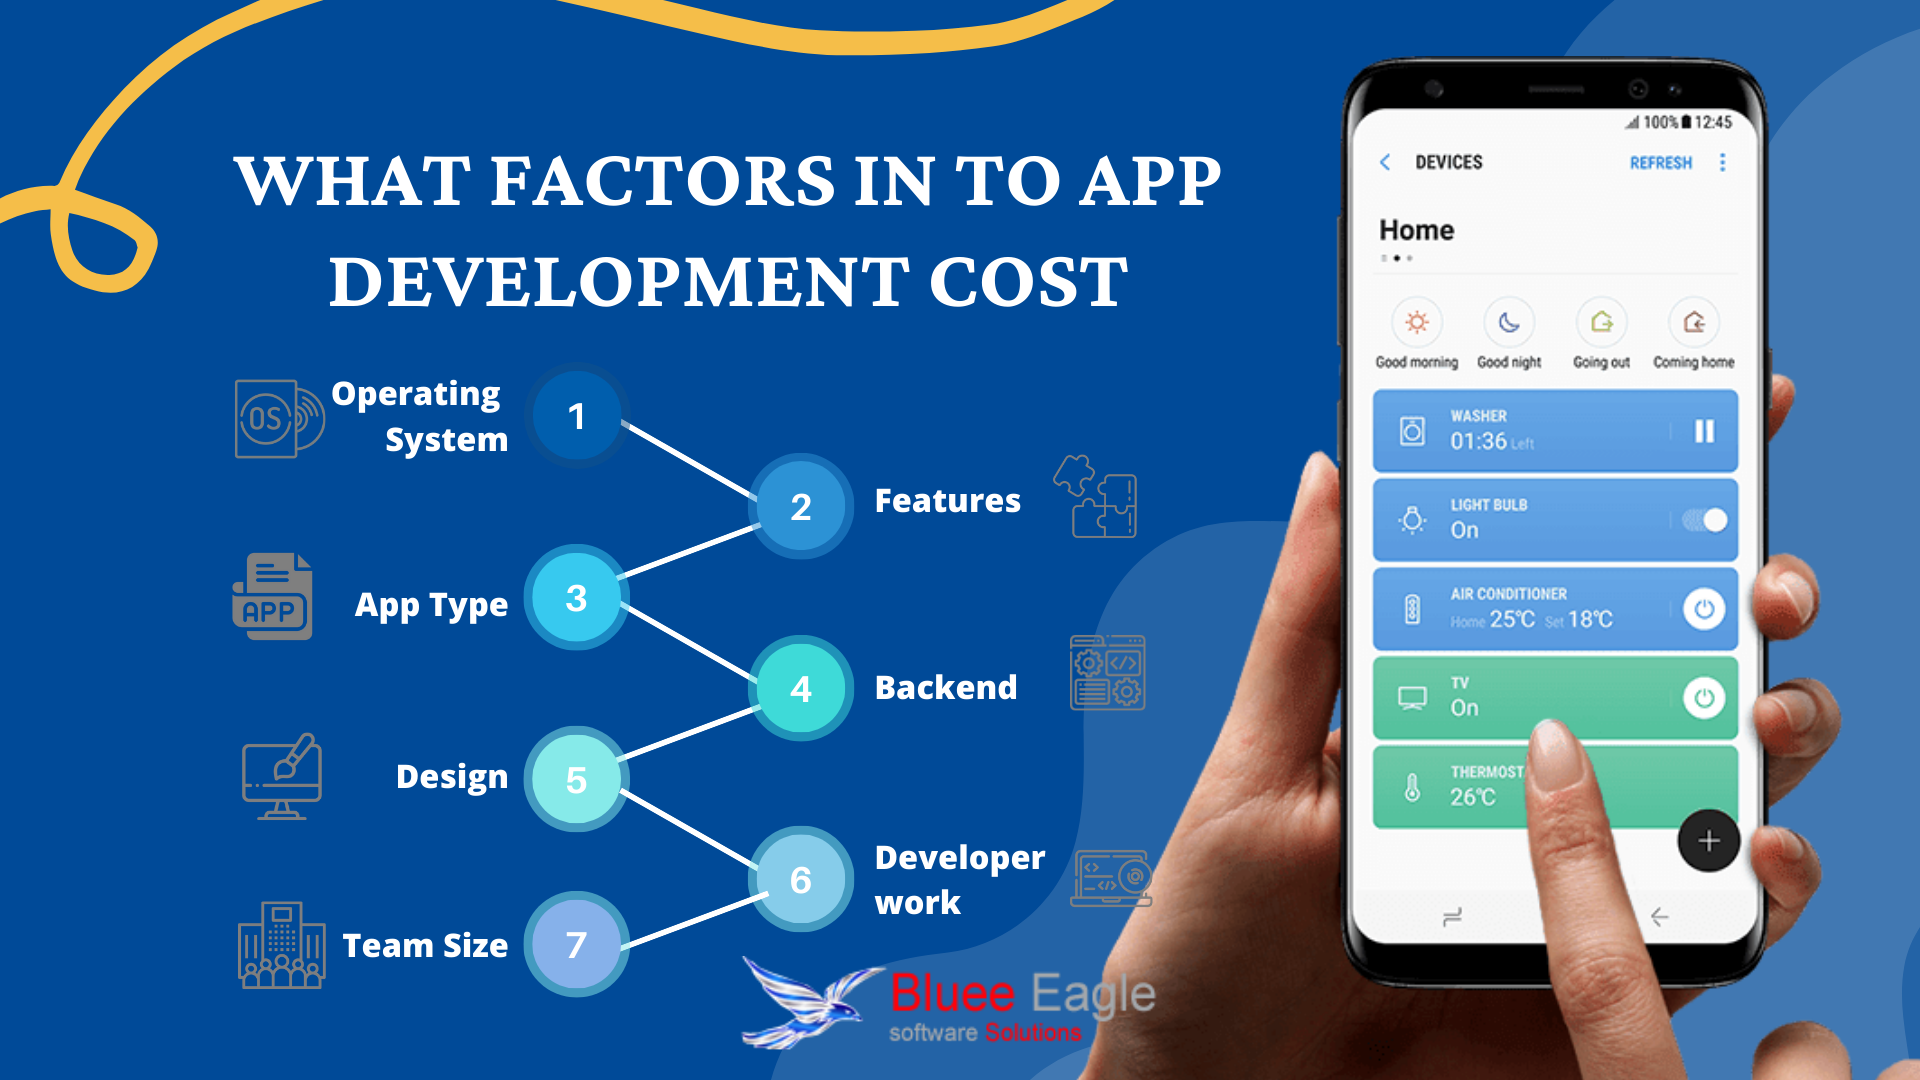 App Development Cost Breakdown: How Much It Costs to Make an App